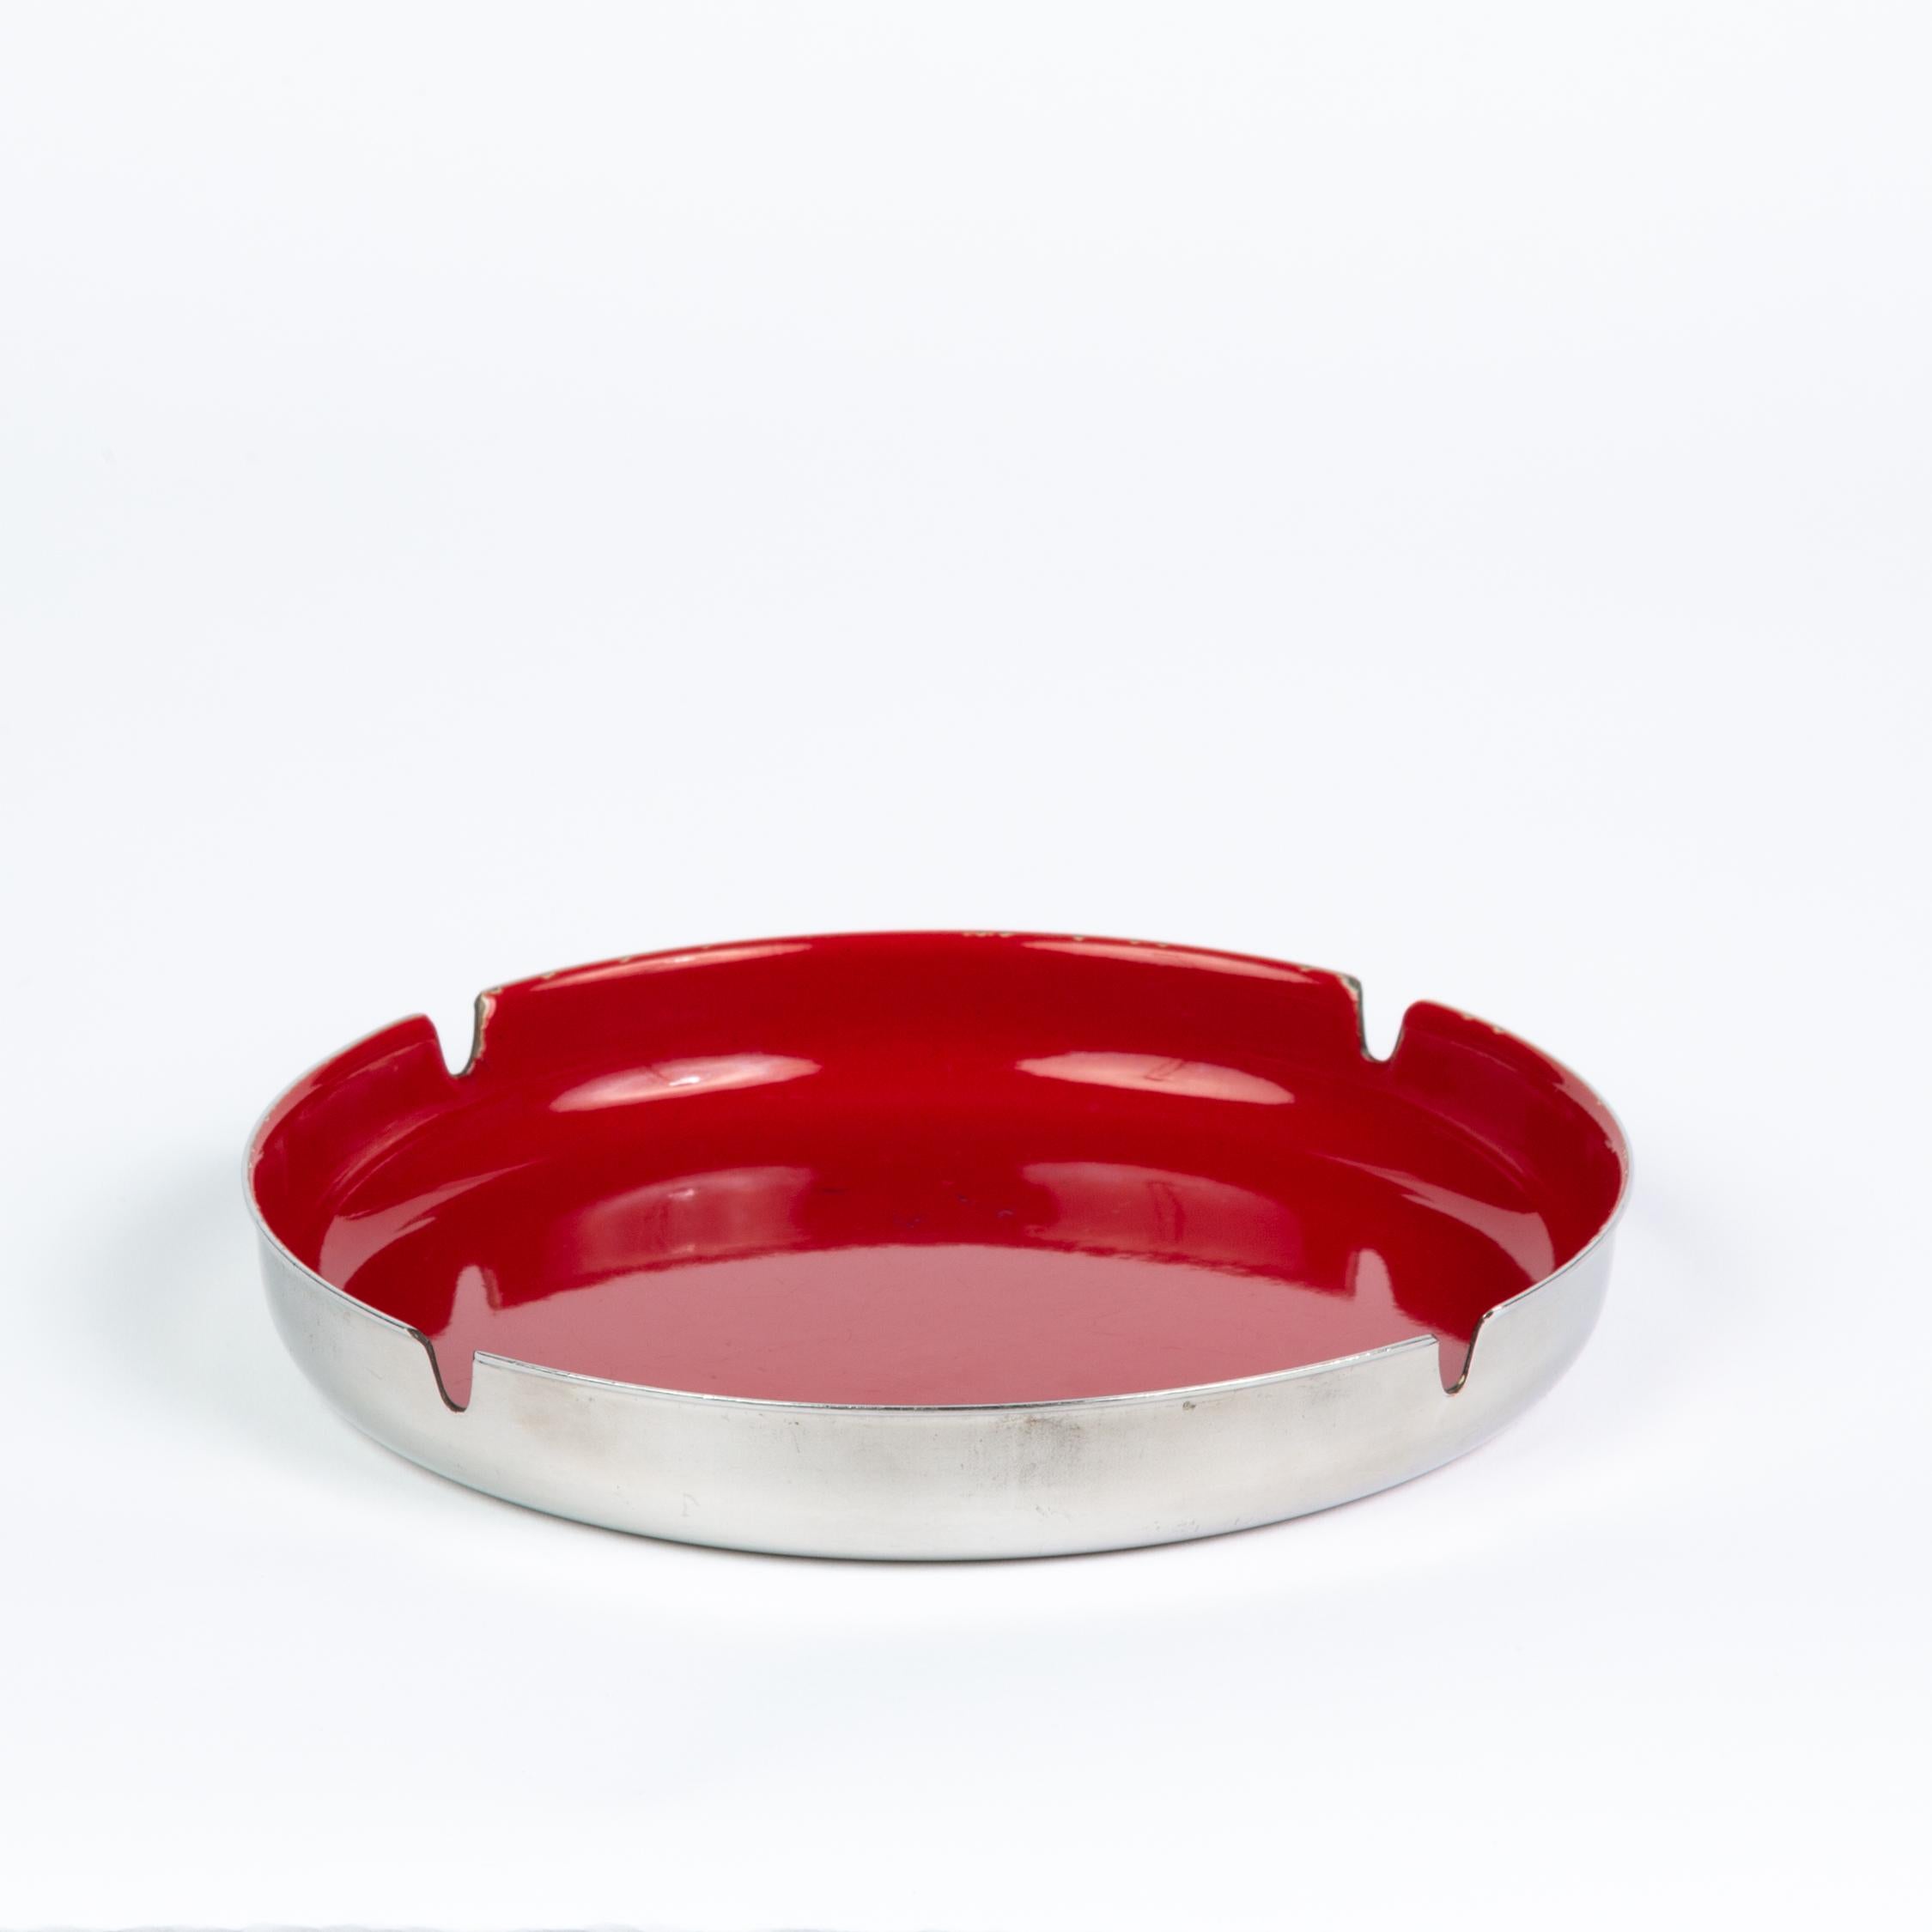 Enameled Enamelware and Stainless Steel Ashtray by Leif Wessmann